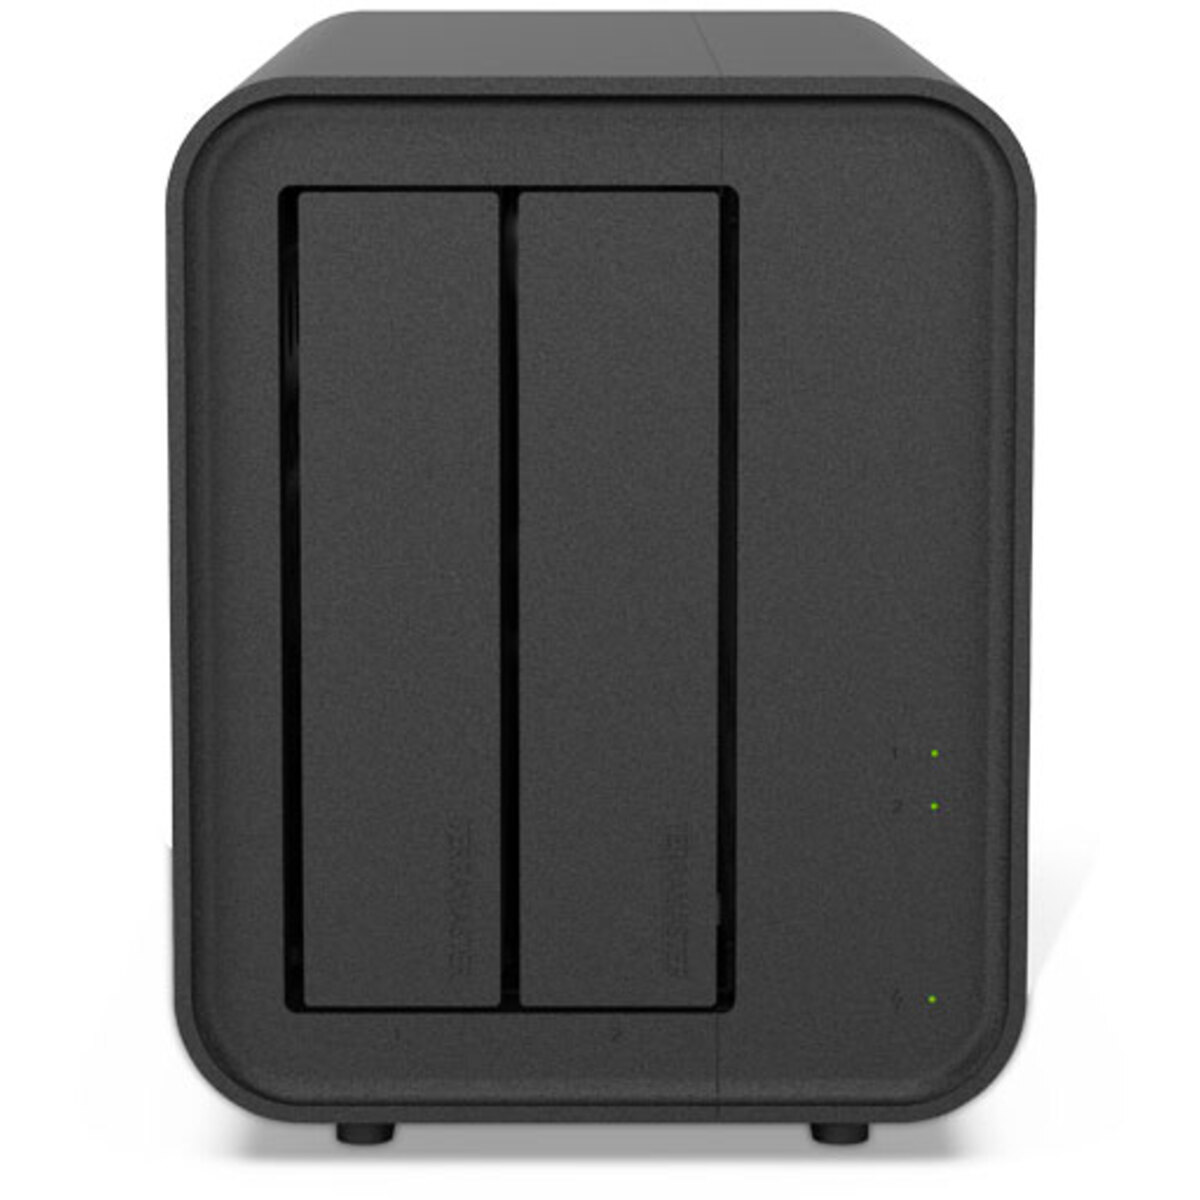 TerraMaster D5 Hybrid 10tb 2-Bay Desktop Multimedia / Power User / Business DAS - Direct Attached Storage Device 1x10tb Seagate EXOS X18 ST10000NM018G 3.5 7200rpm SATA 6Gb/s HDD ENTERPRISE Class Drives Installed - Burn-In Tested D5 Hybrid